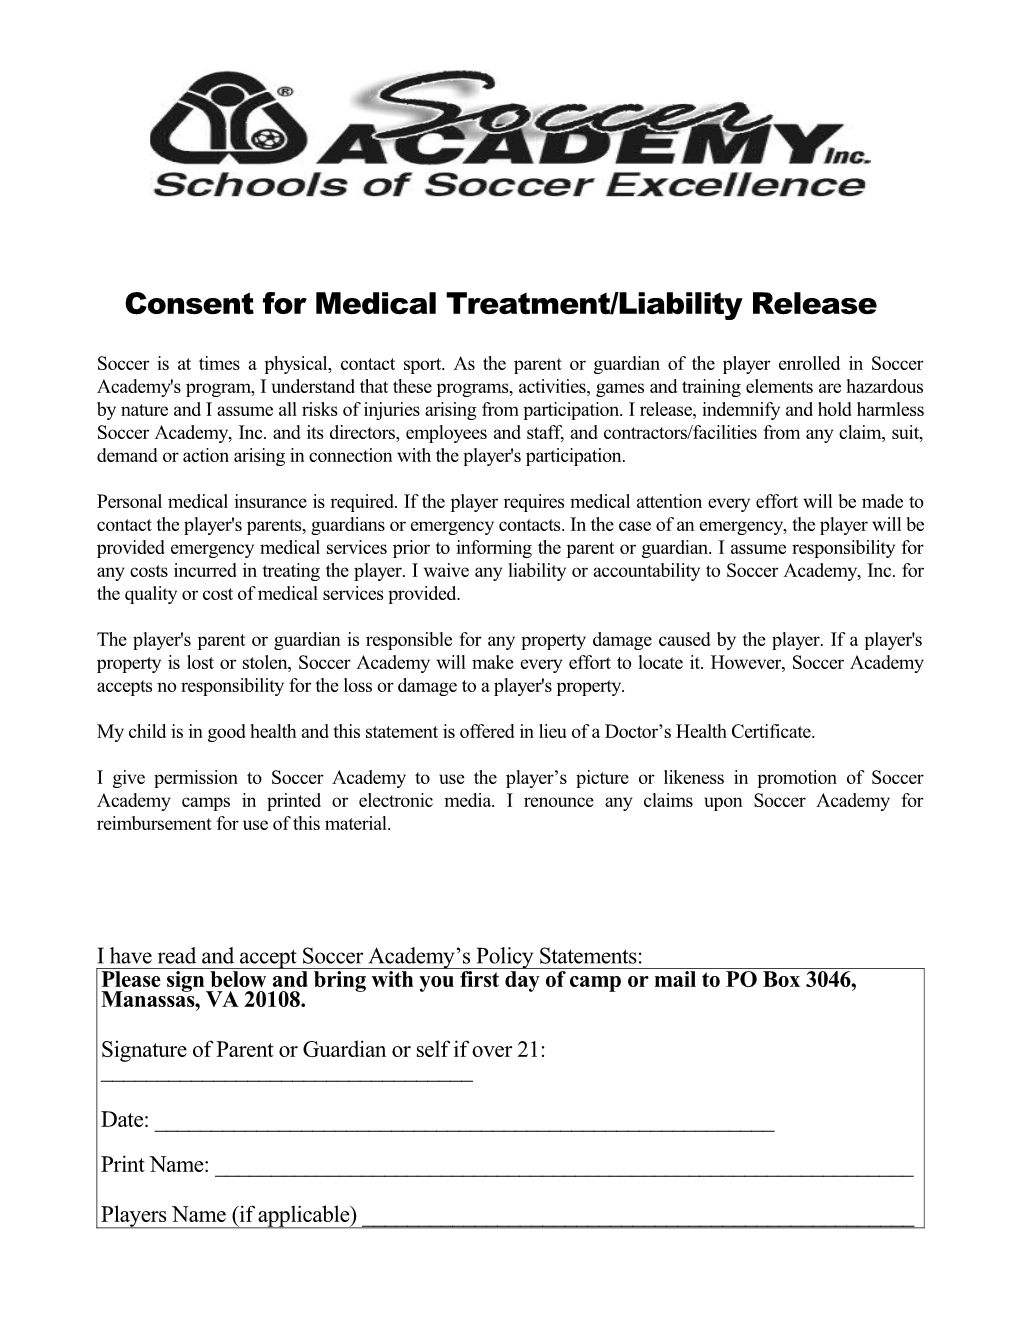 Consent for Medical Treatment/Liability Release